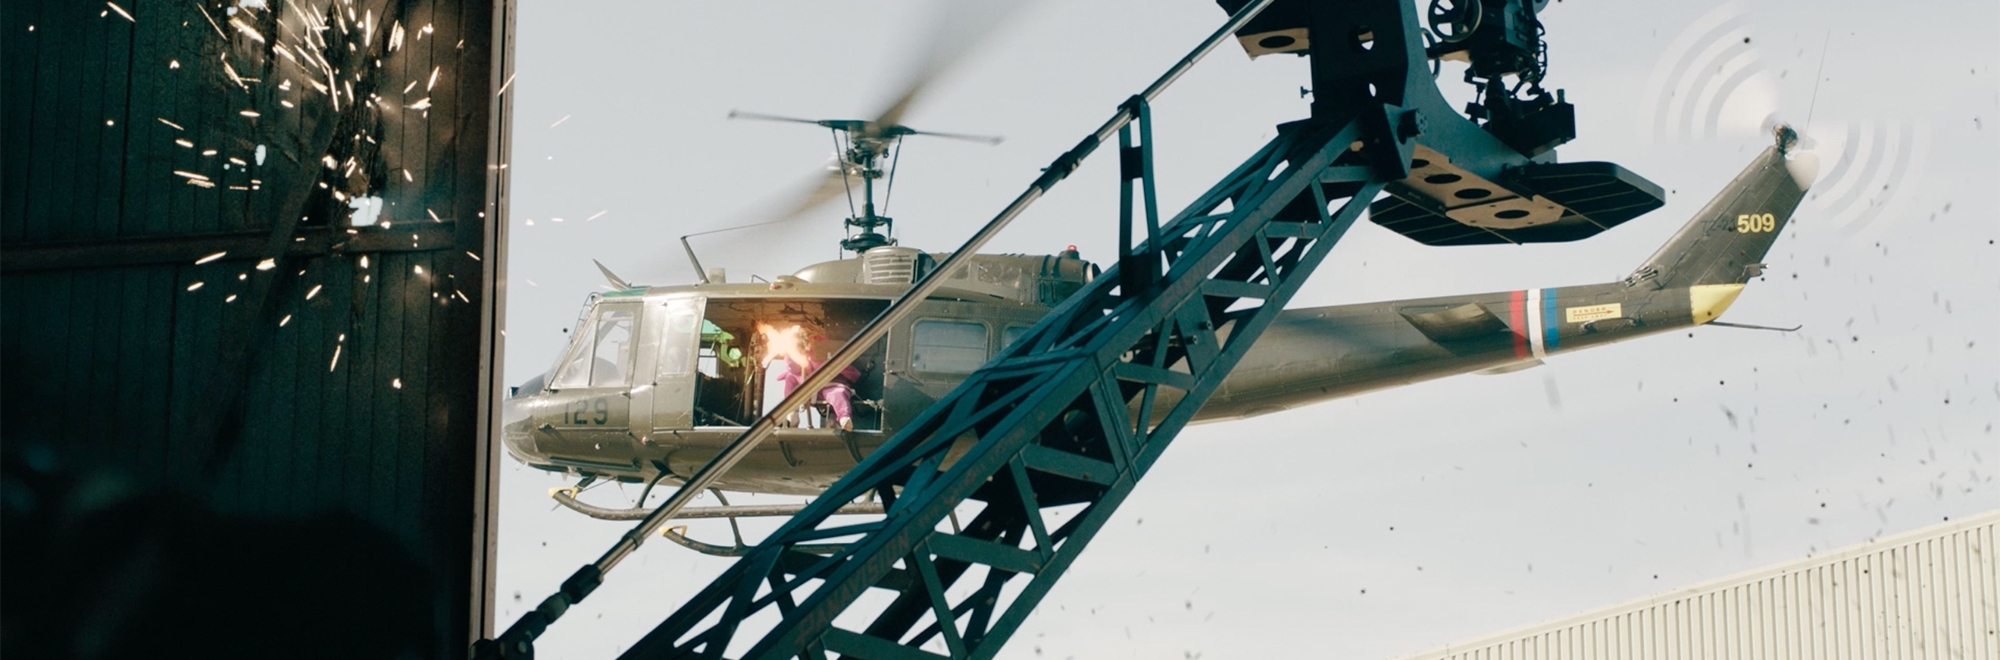 ITV’s Drama vs Reality returns with an epic helicopter shoot-out between actor Richie Campbell and reality queen Ferne McCann